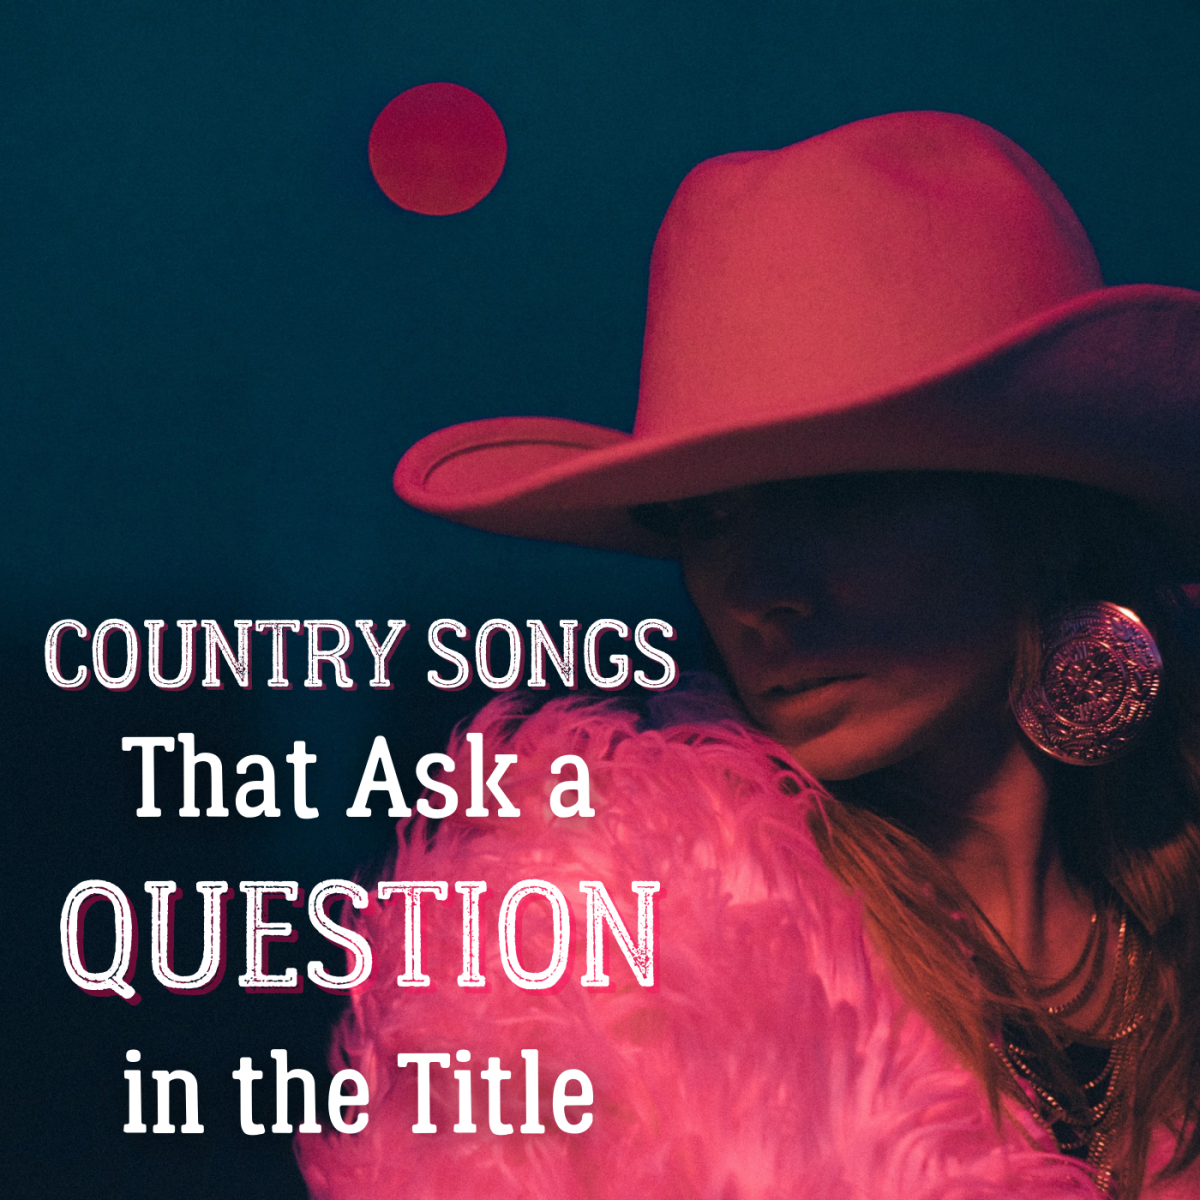 Country music is filled with songs that ask a question in the title. How many can you think of? How many of these country songs do you recognize?